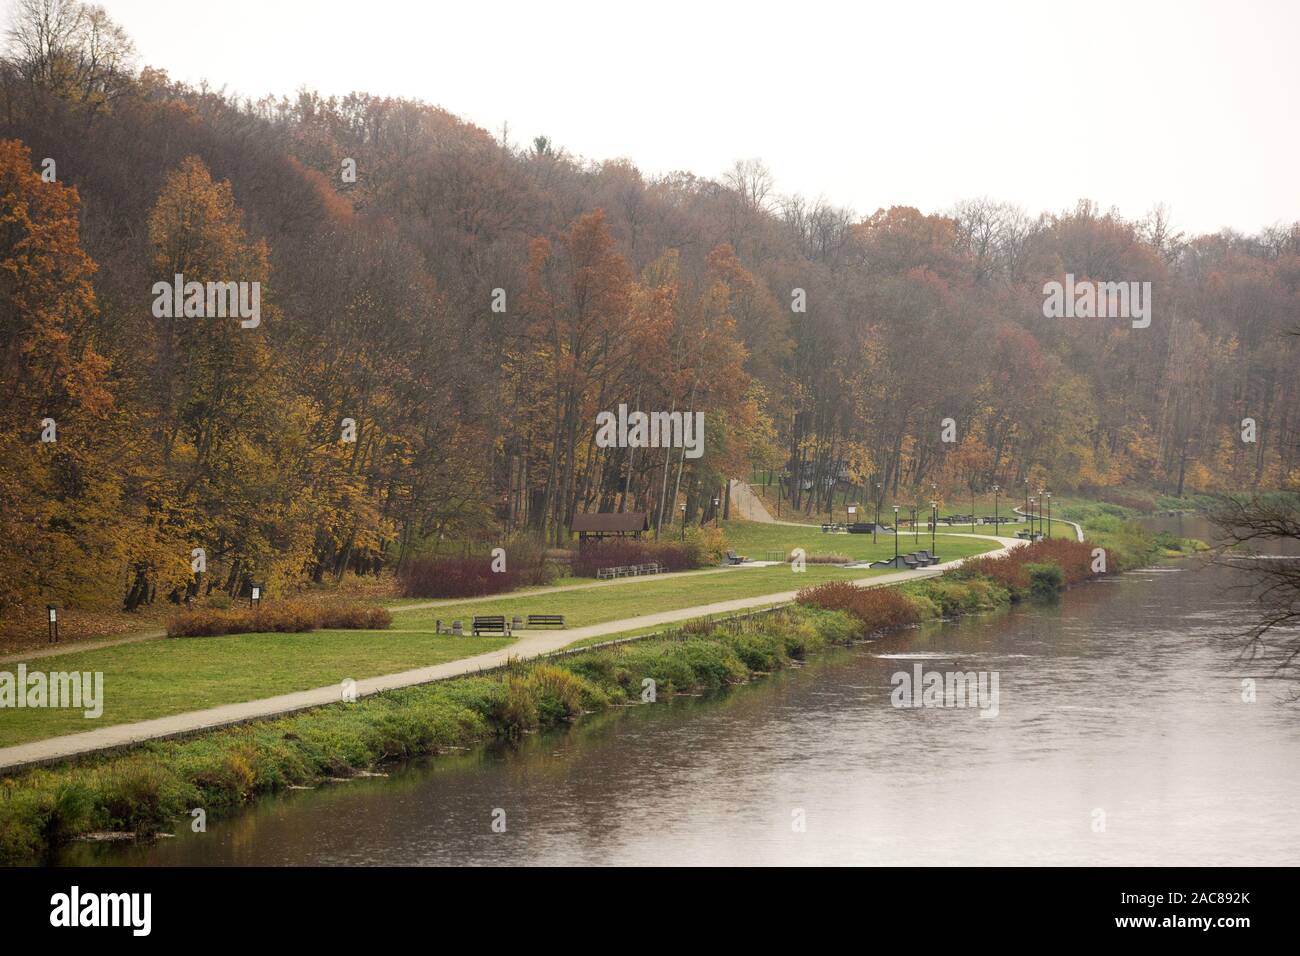 A view of the boulevards at the Lusatian Neisse river in Zgorzelec.Zgorzelec and Goerlitz are partner cities of the Euro region Neisse located in Saxony (Germany) and Lower Silesia (Poland) Stock Photo